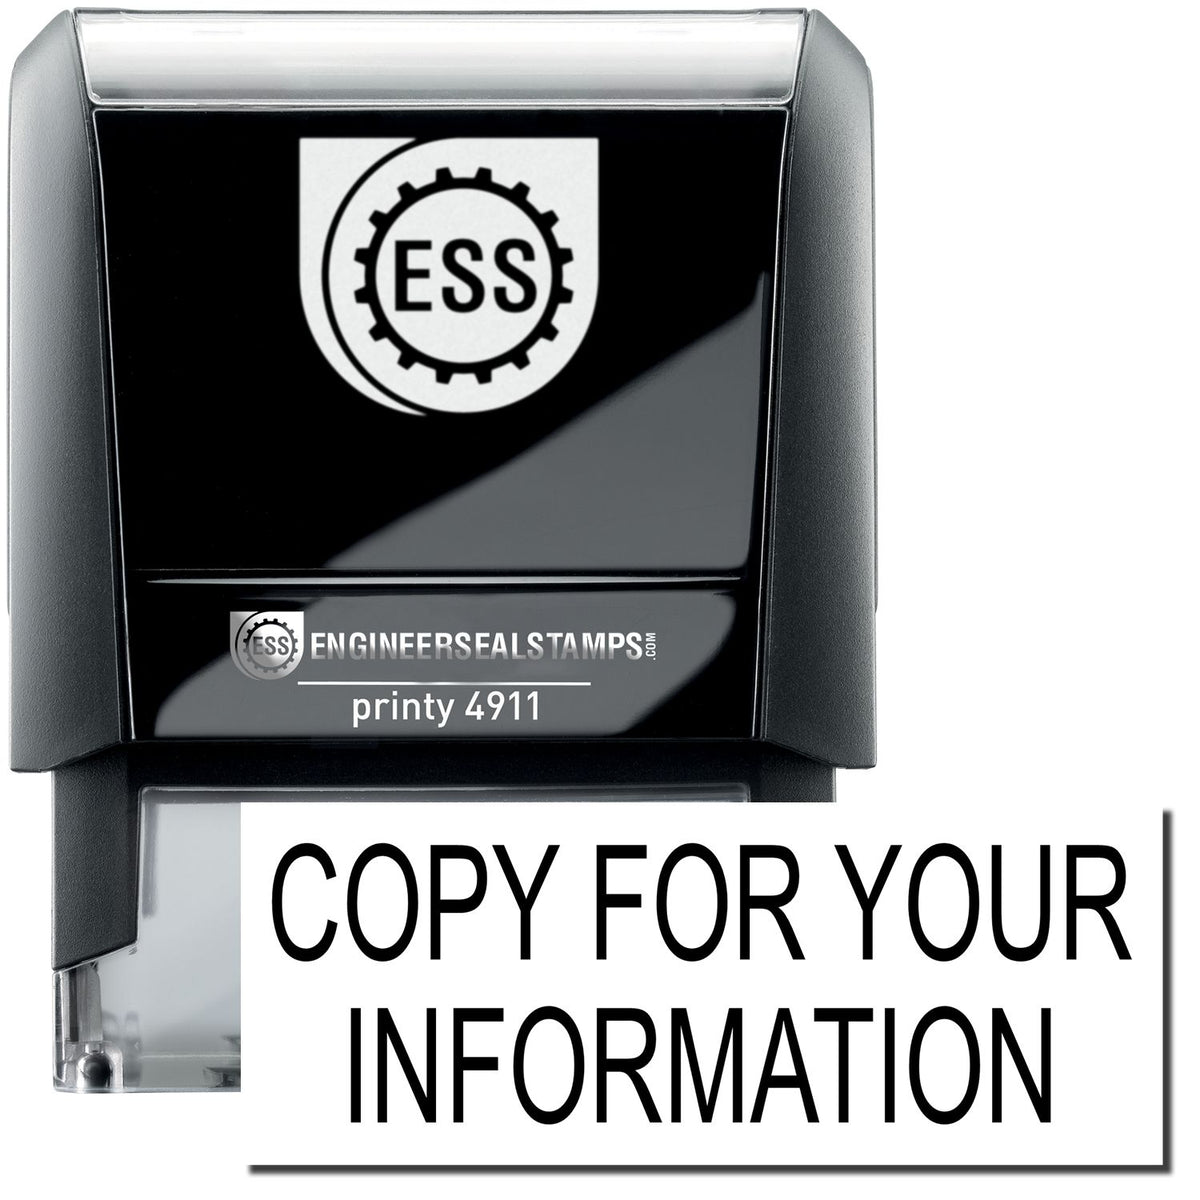 A self-inking stamp with a stamped image showing how the text &quot;COPY FOR YOUR INFORMATION&quot; is displayed after stamping.